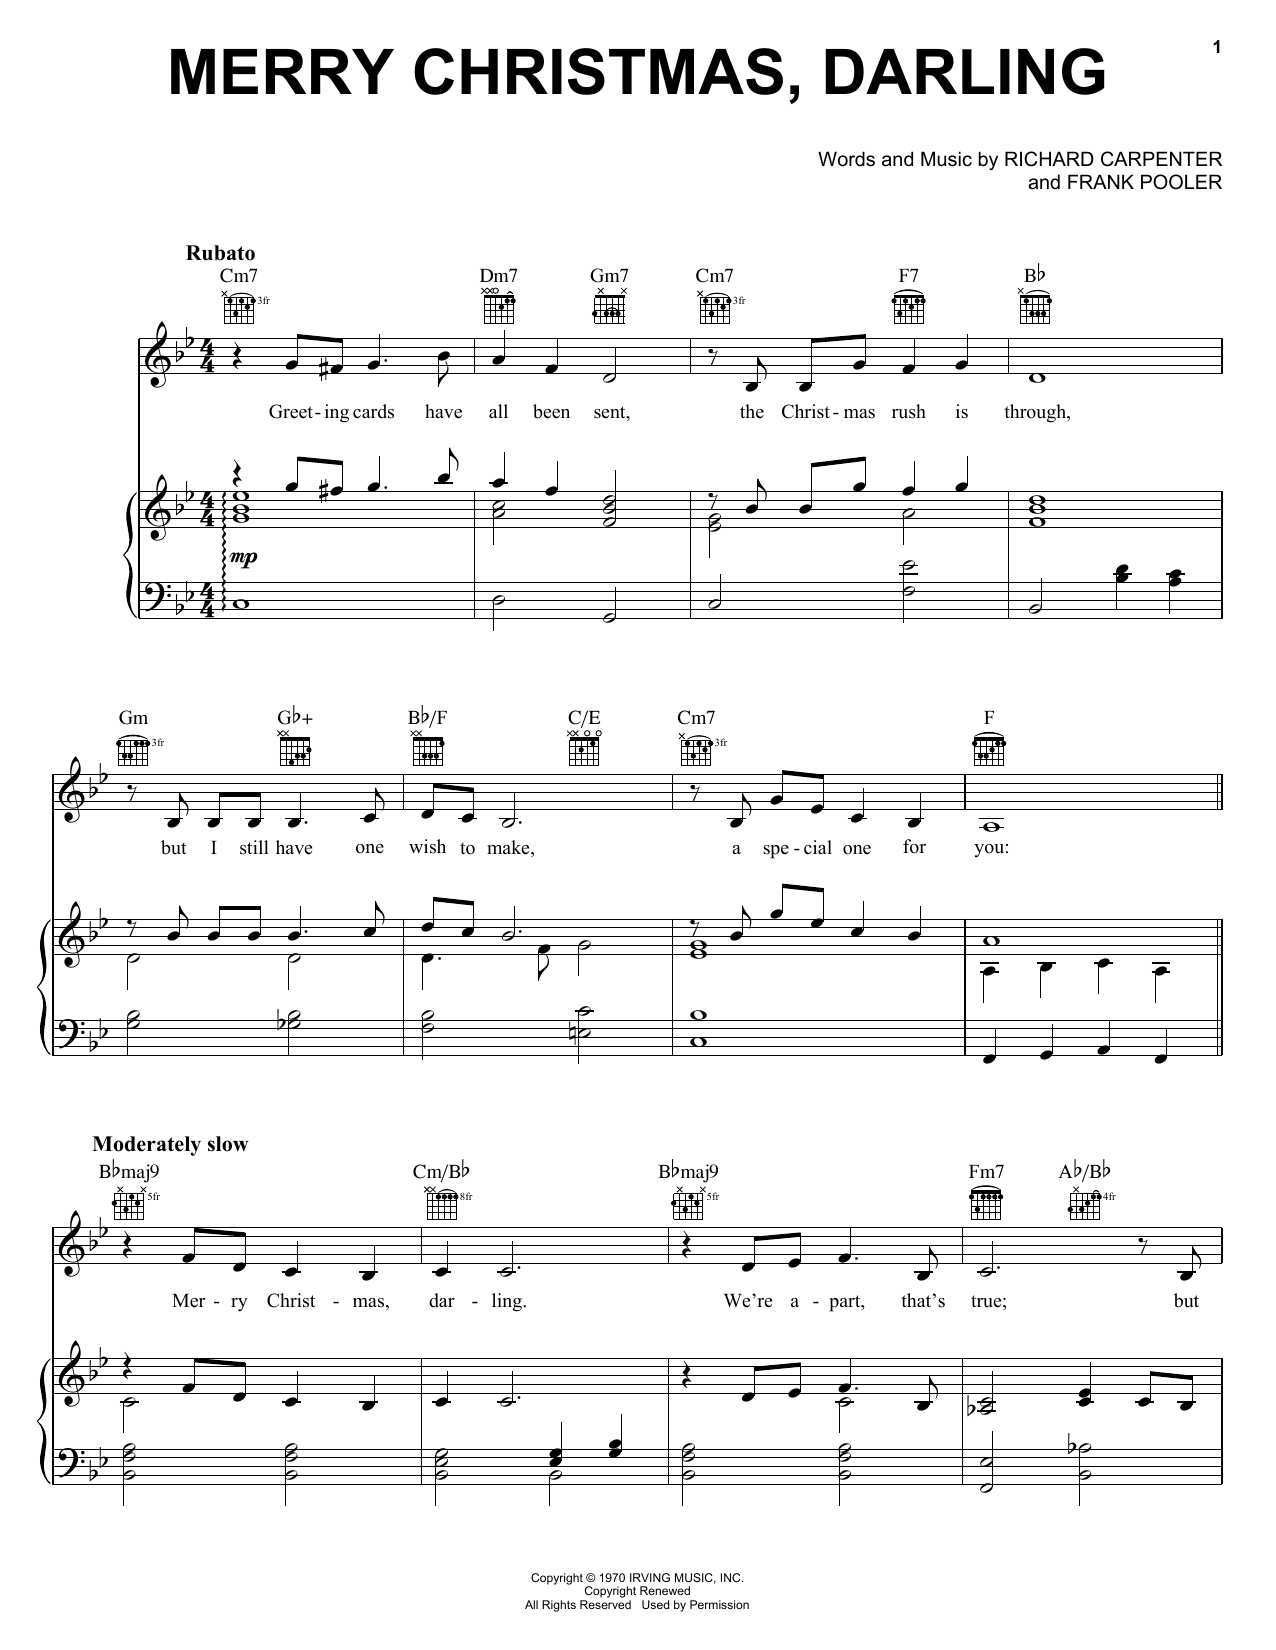 Carpenters Merry Christmas, Darling sheet music notes and chords. Download Printable PDF.